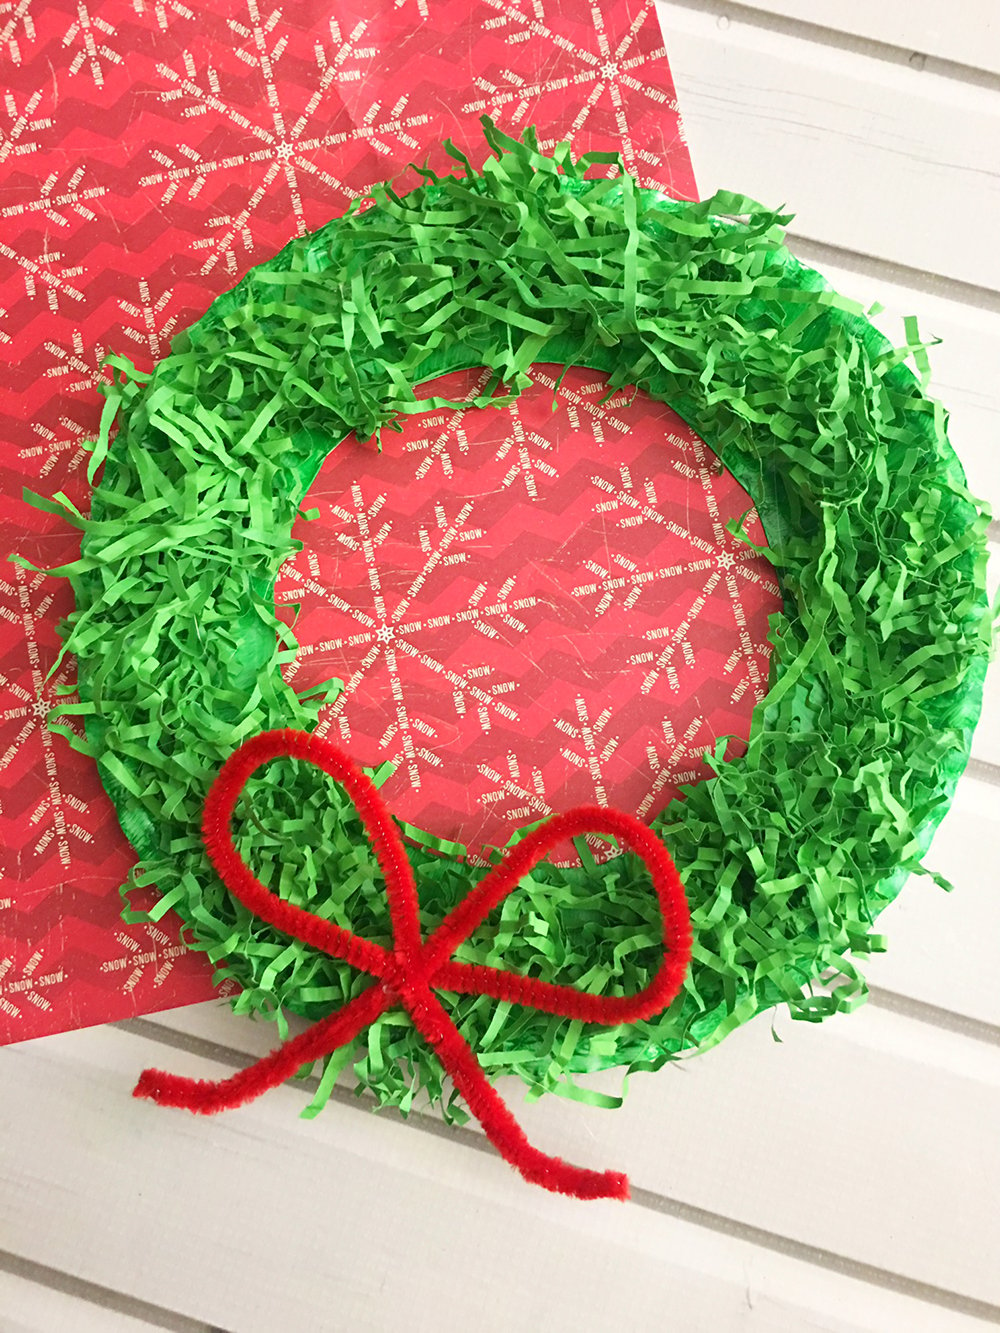 DIY Paper Christmas Wreath is a fun paper craft to do with the whole family. It's inexpensive to make and adds a festive touch to your holiday decor.